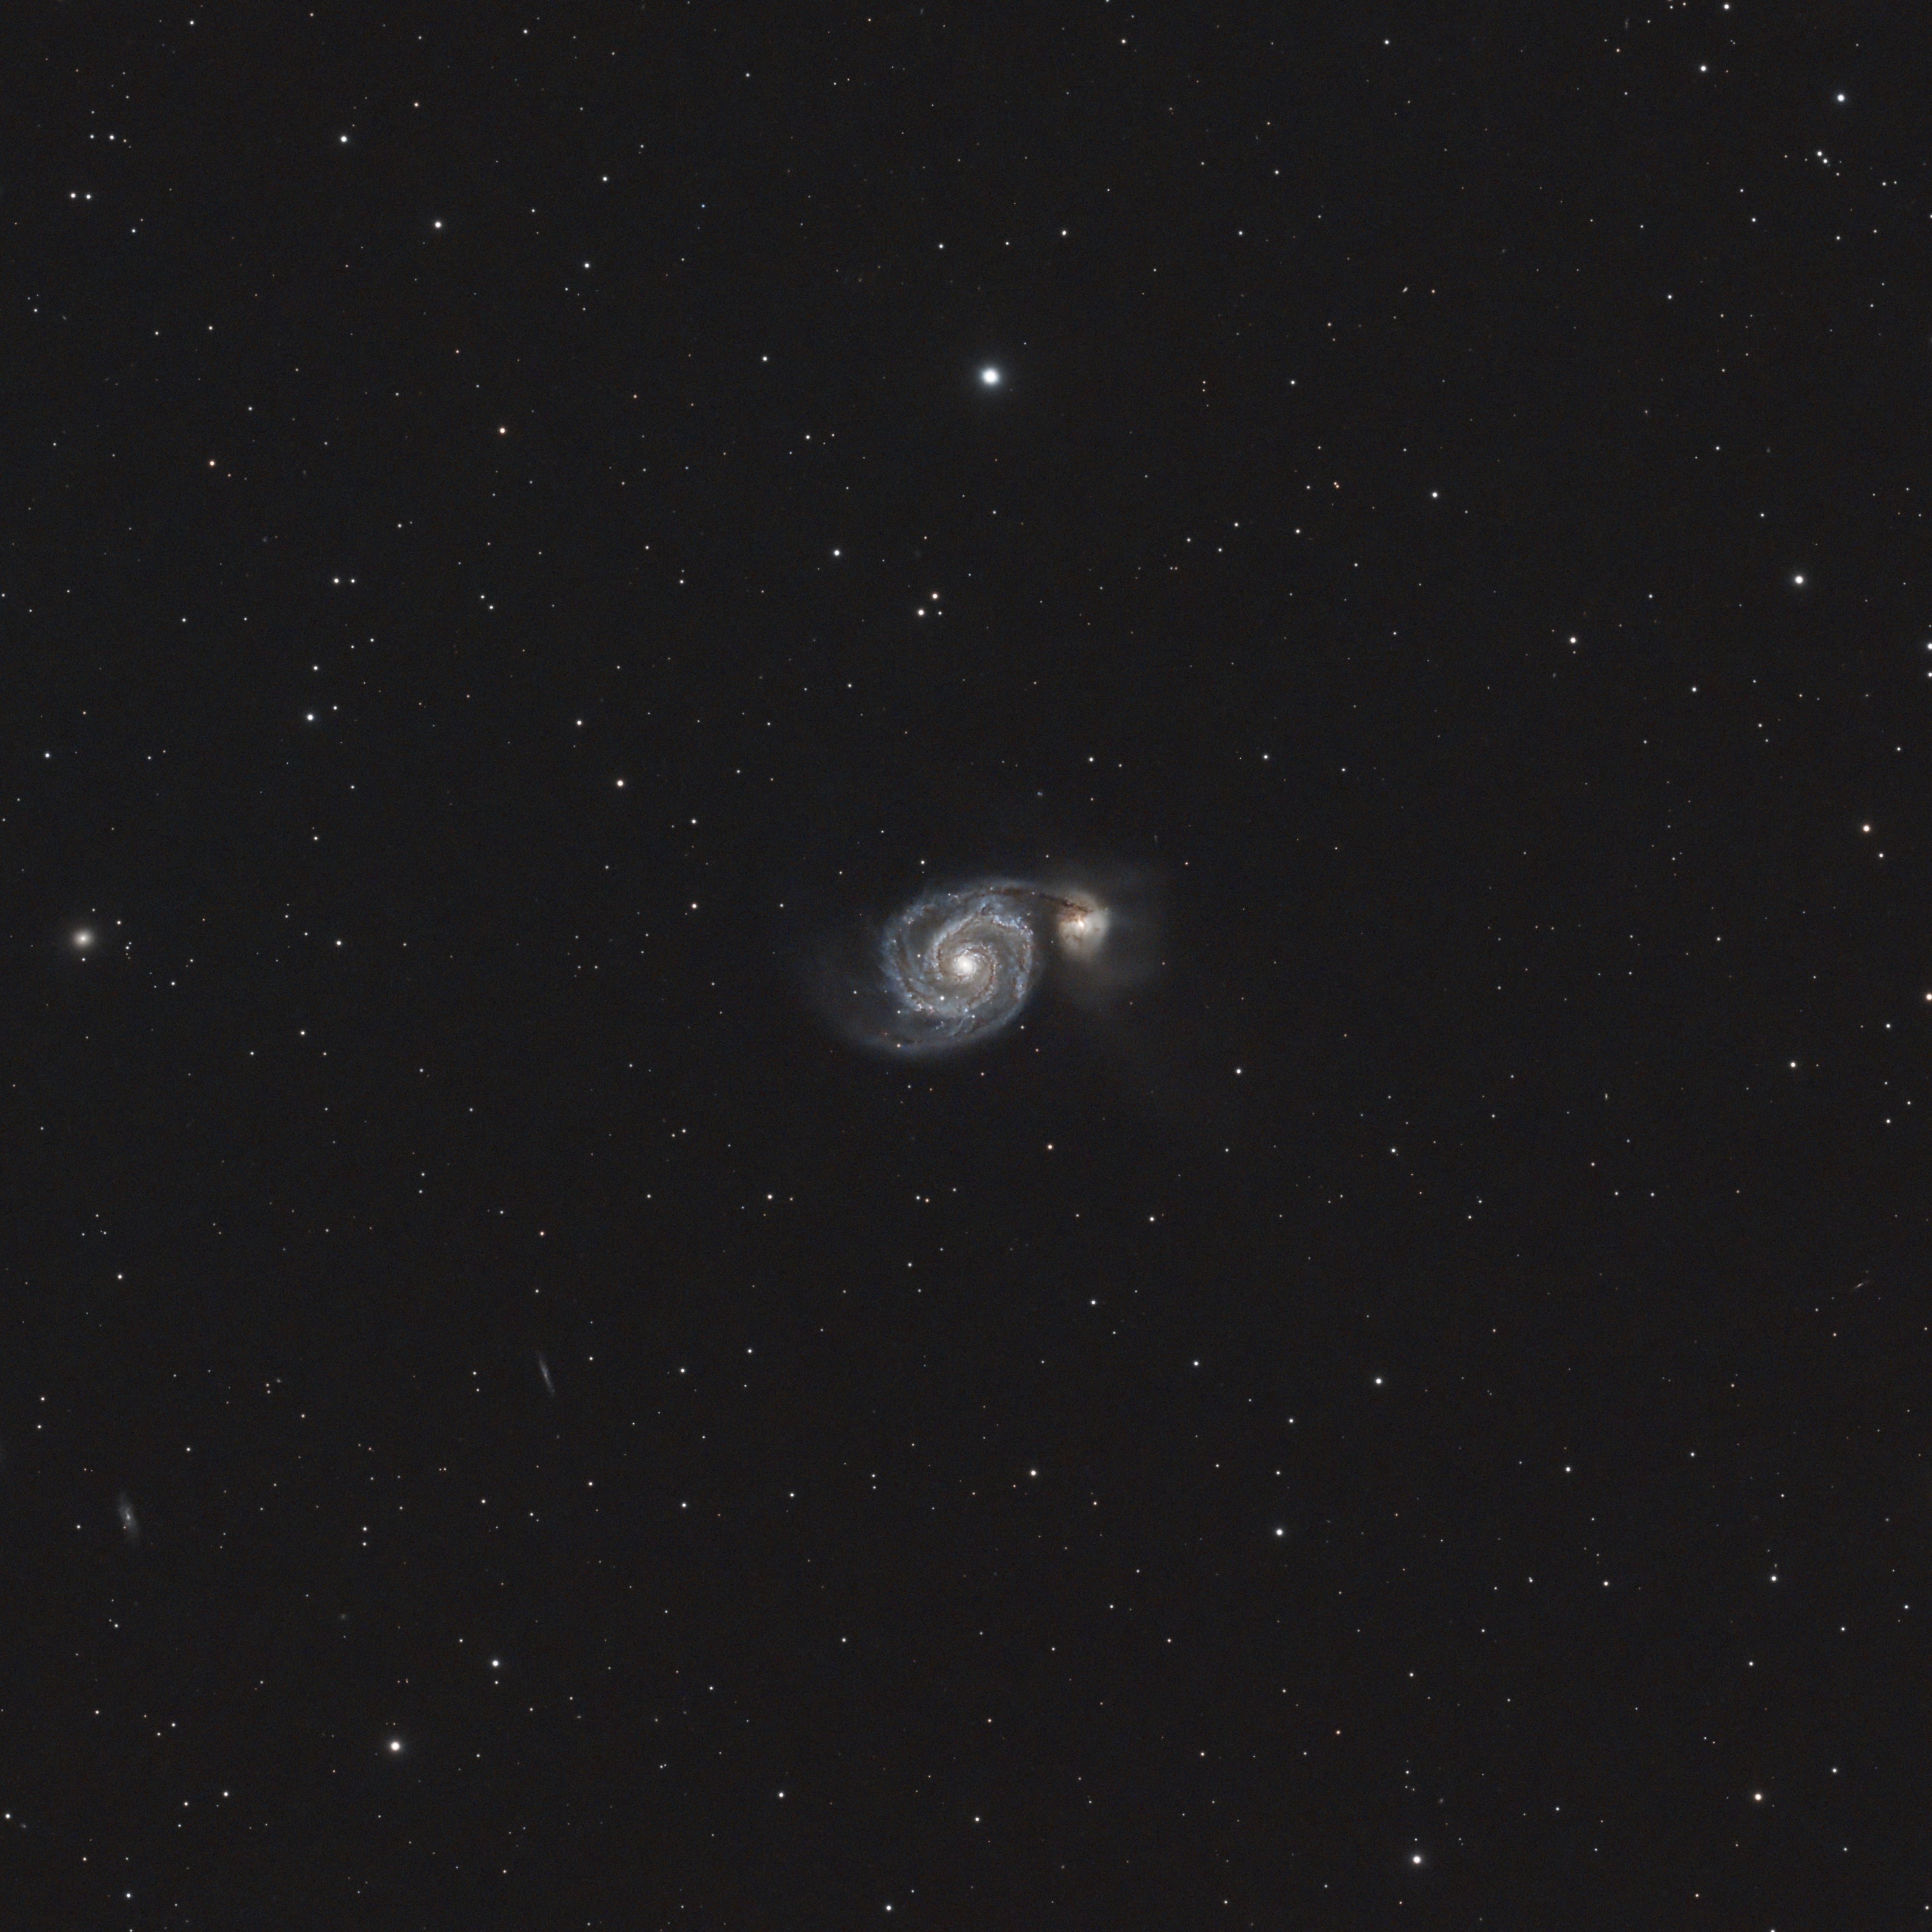 M51 and its sky neighbours